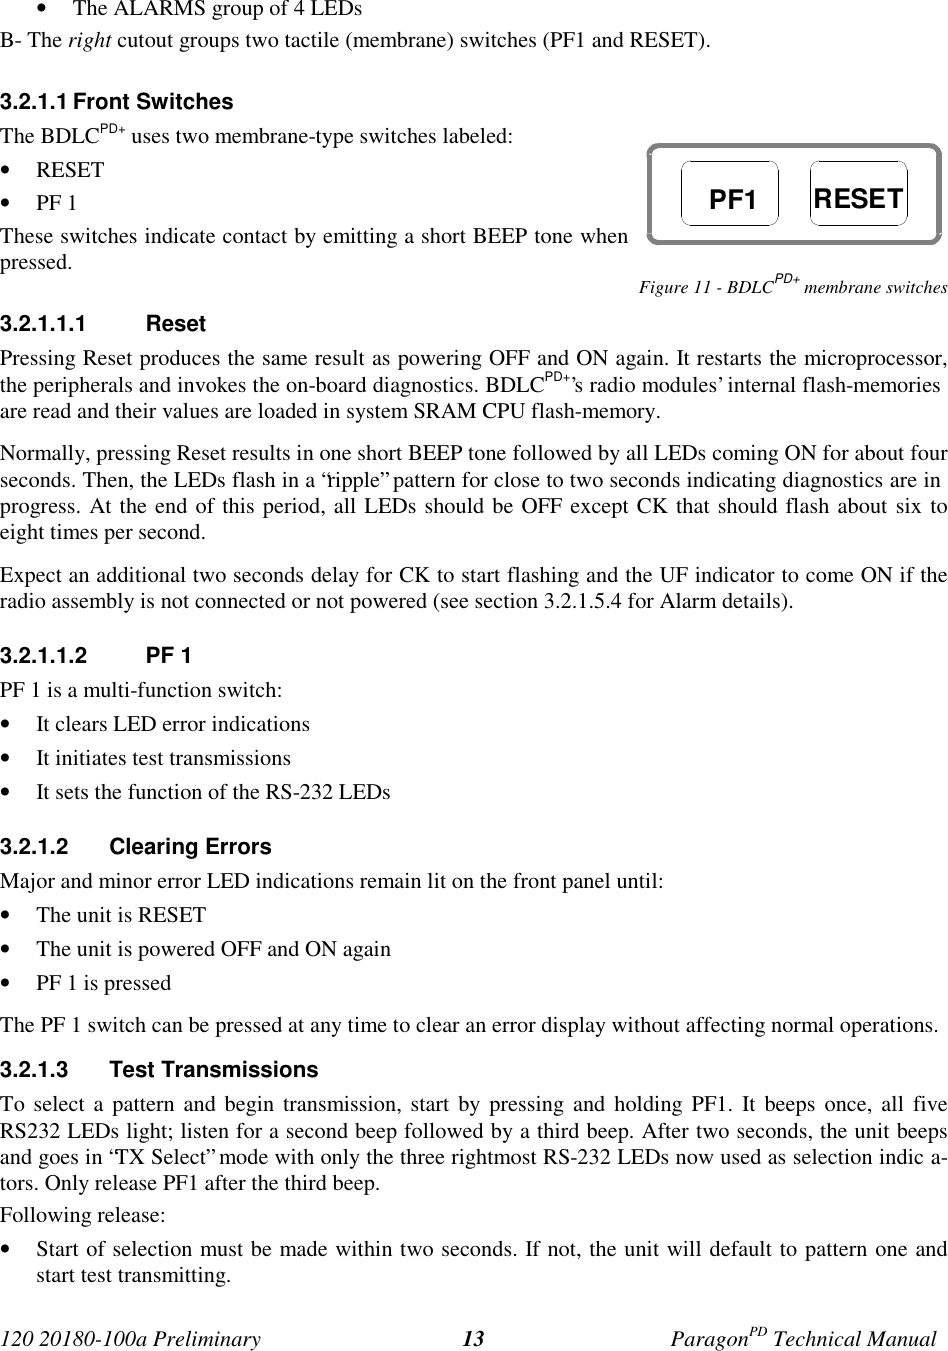 Page 20 of CalAmp Wireless Networks BDD4T85-1 Paragon/PD User Manual Parg PD  T100a Prelim